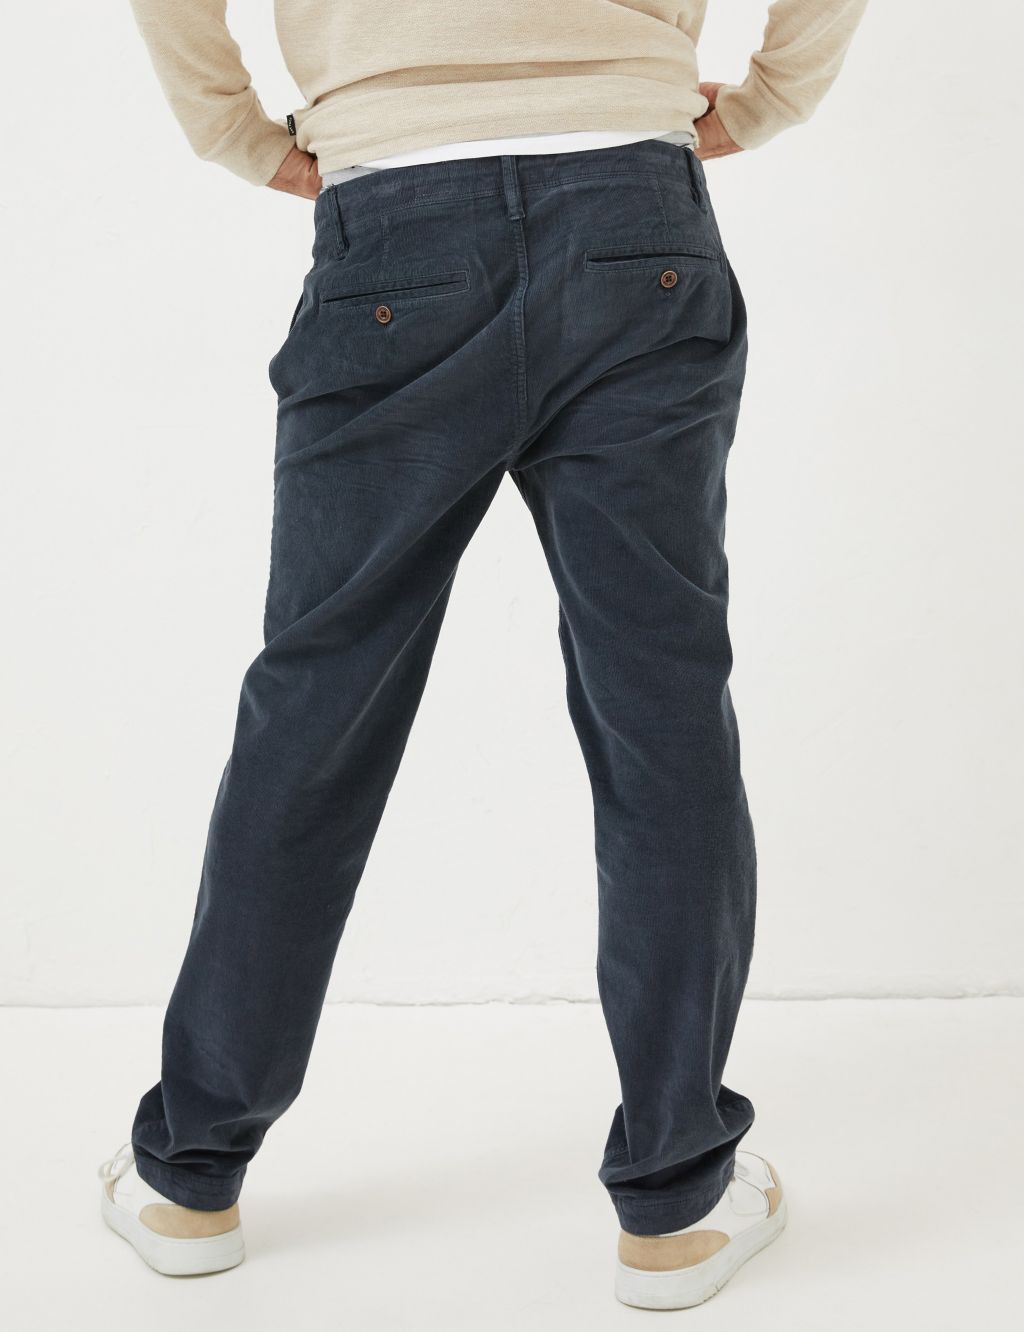 Straight Fit Corduroy Trousers image 3